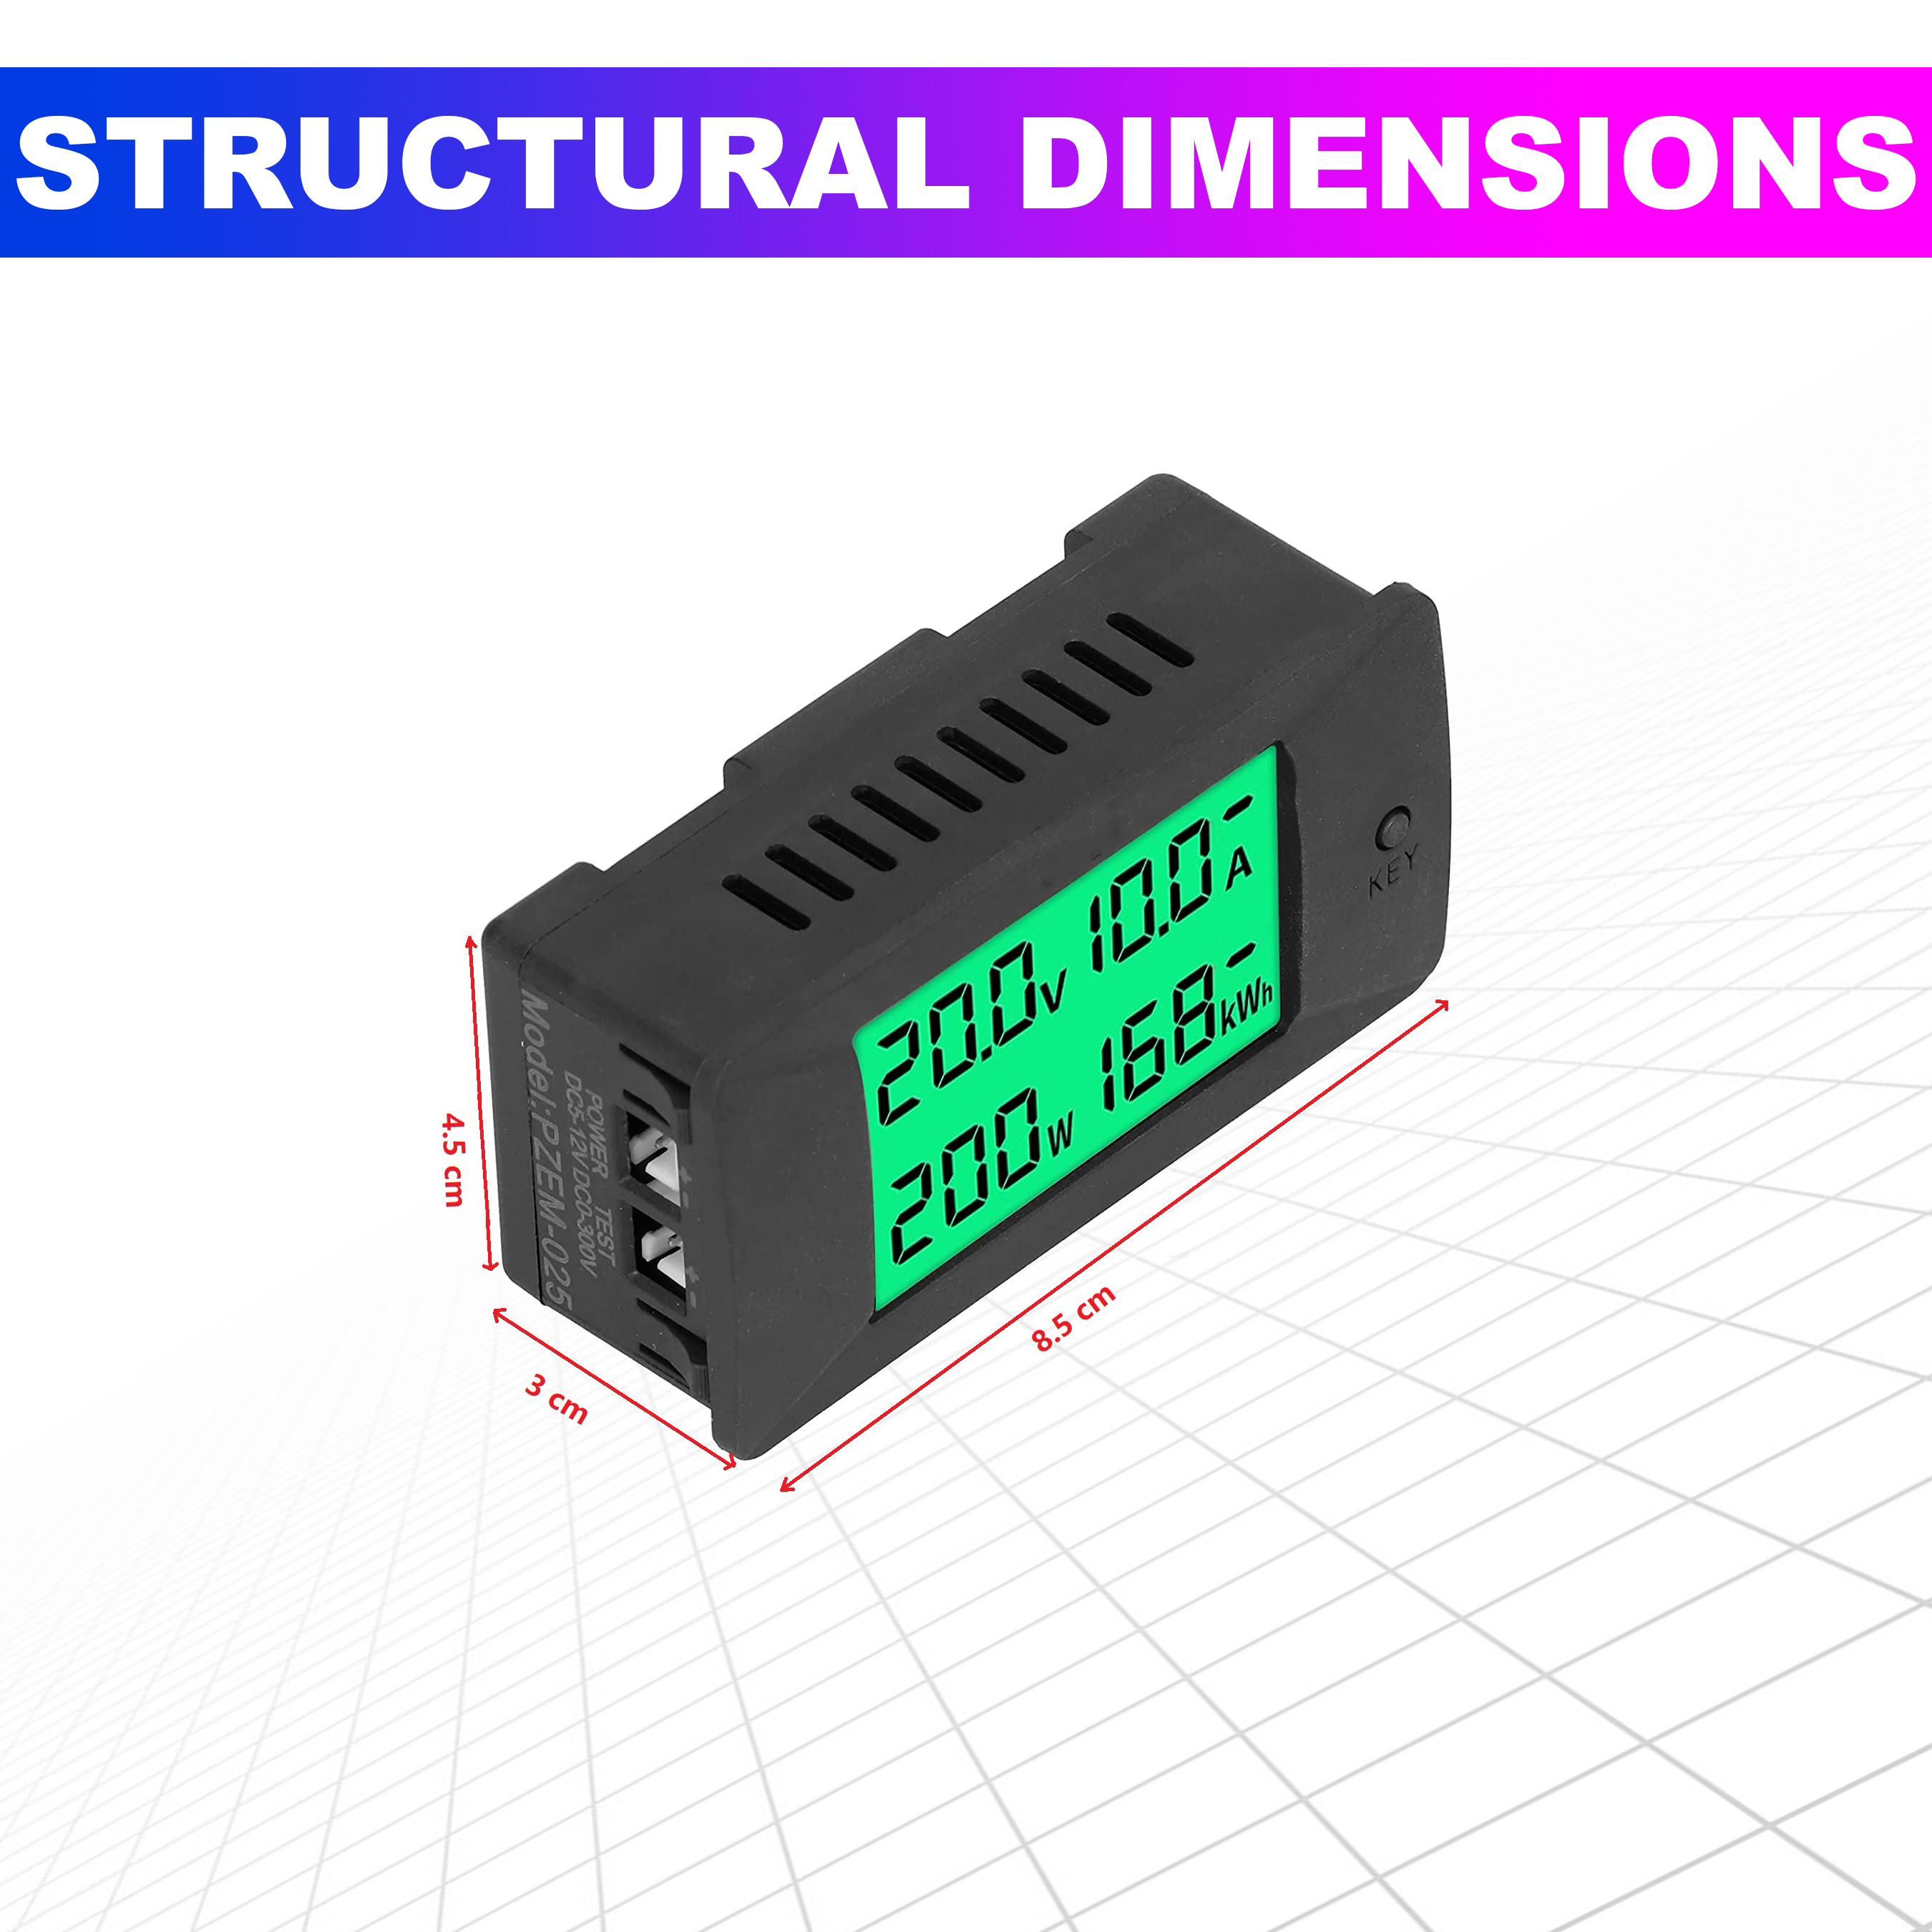 DC Electrical Parameters Display (300V, 300A)